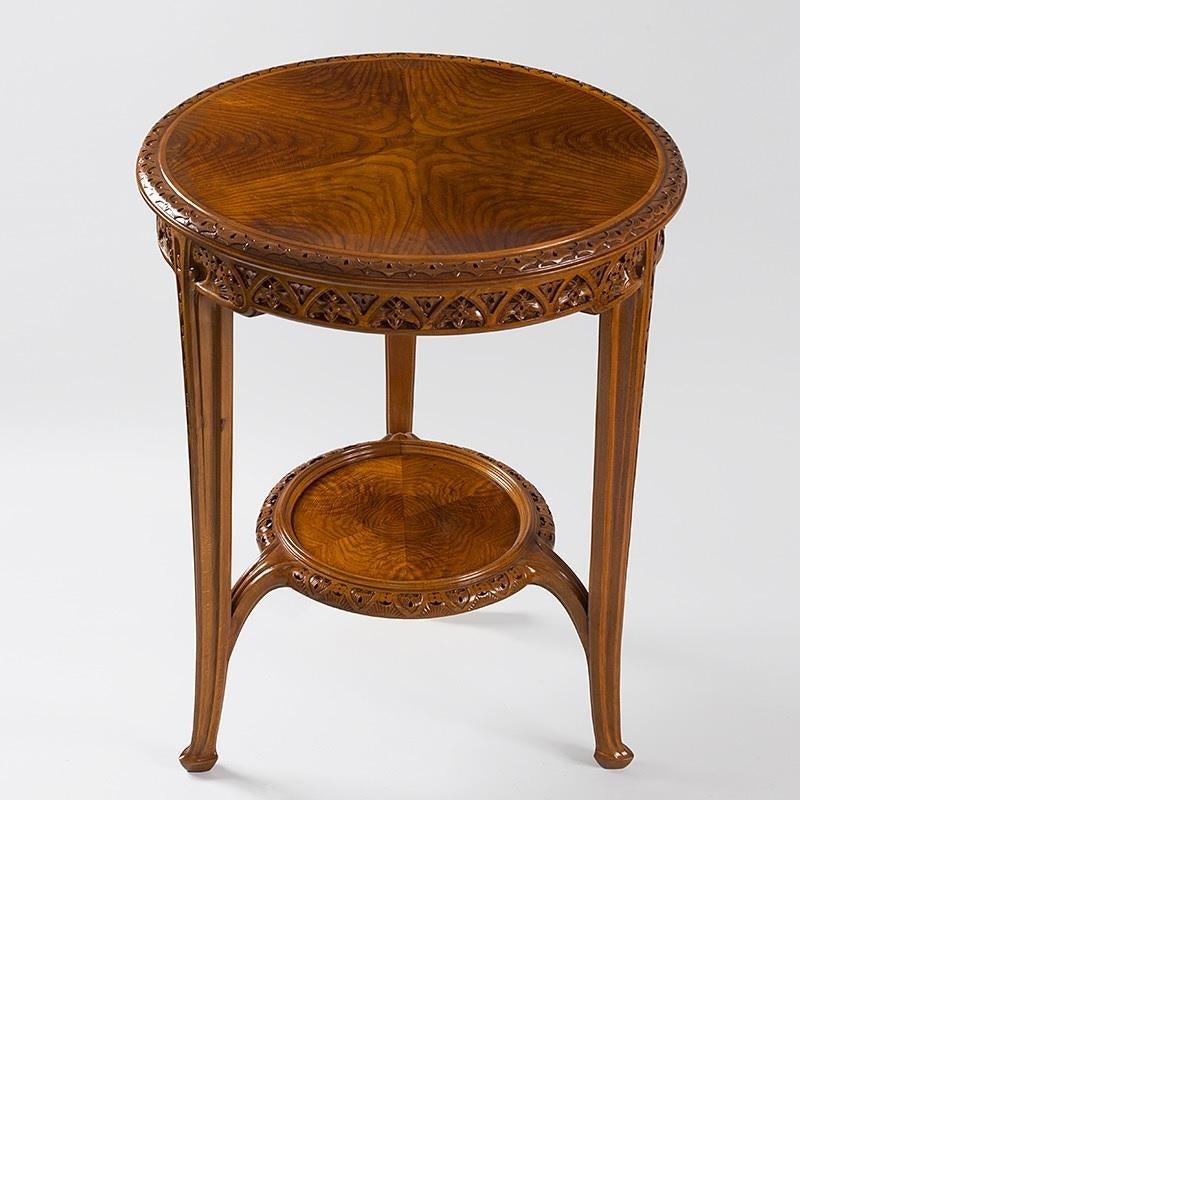 A French Art Nouveau pedestal table by Louis Majorelle. The circular two tier table in beech and walnut wood features carved vegetal motifs in bas-relief. Both the tabletop and the lower shelf are made of beautifully grained wood, circa 1910.
 